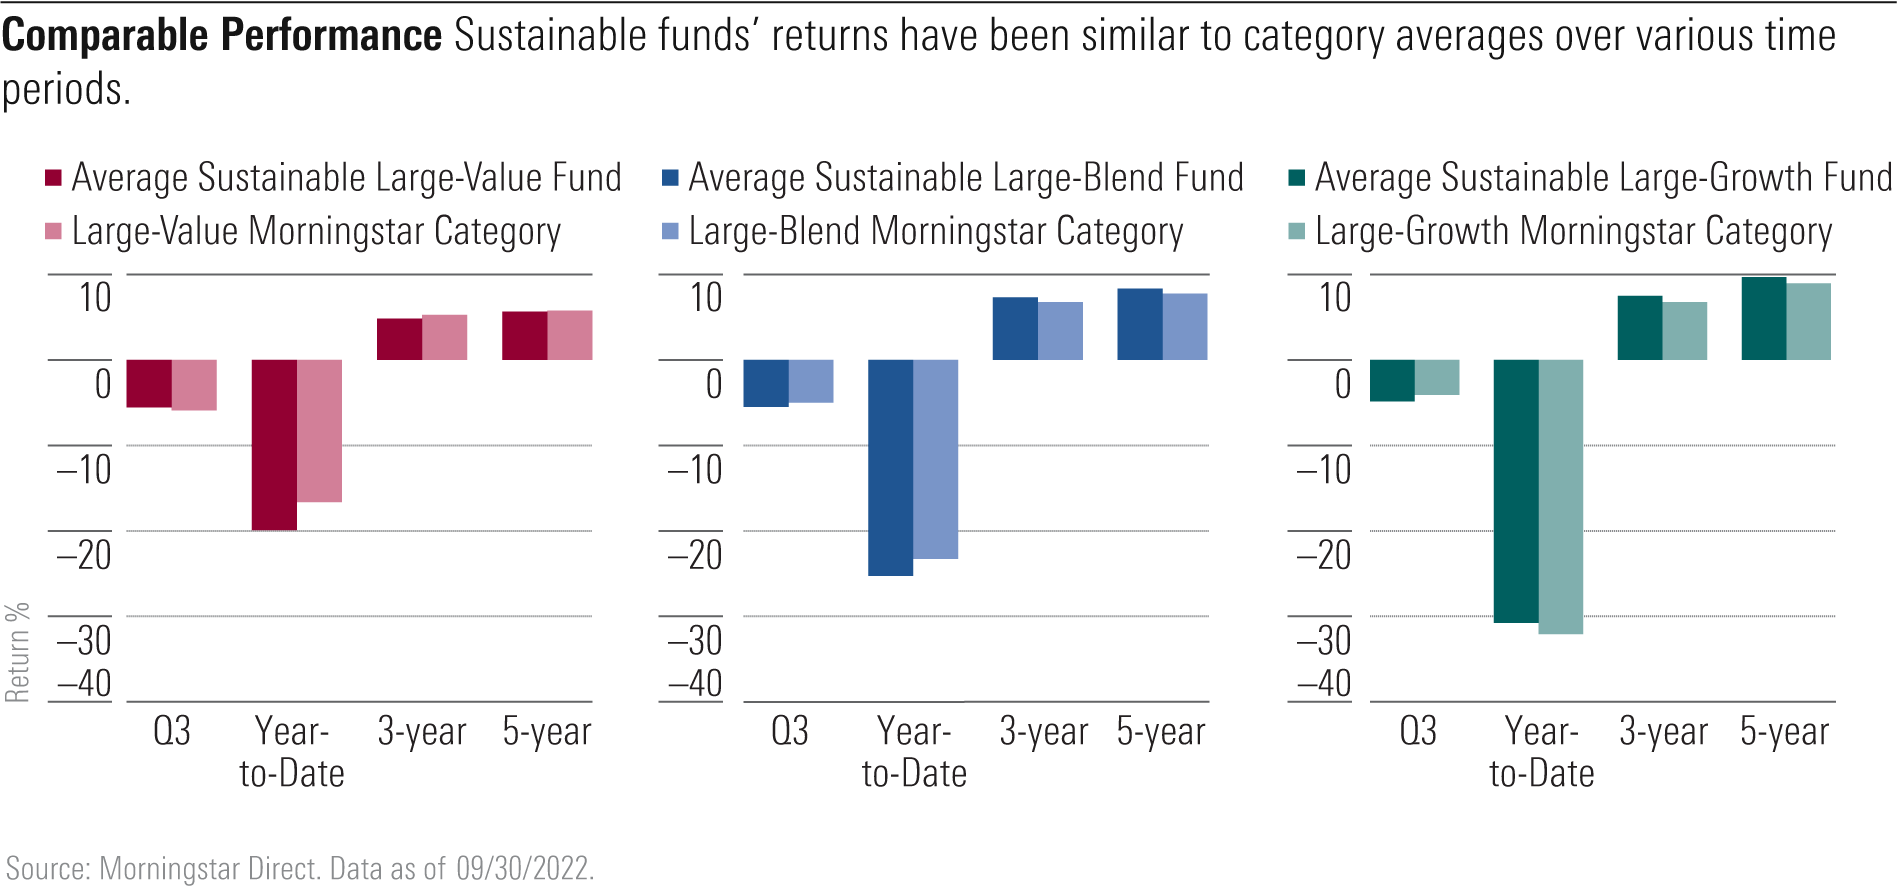 Chart shows that sustainable funds’ returns have been similar to category averages over various time periods.